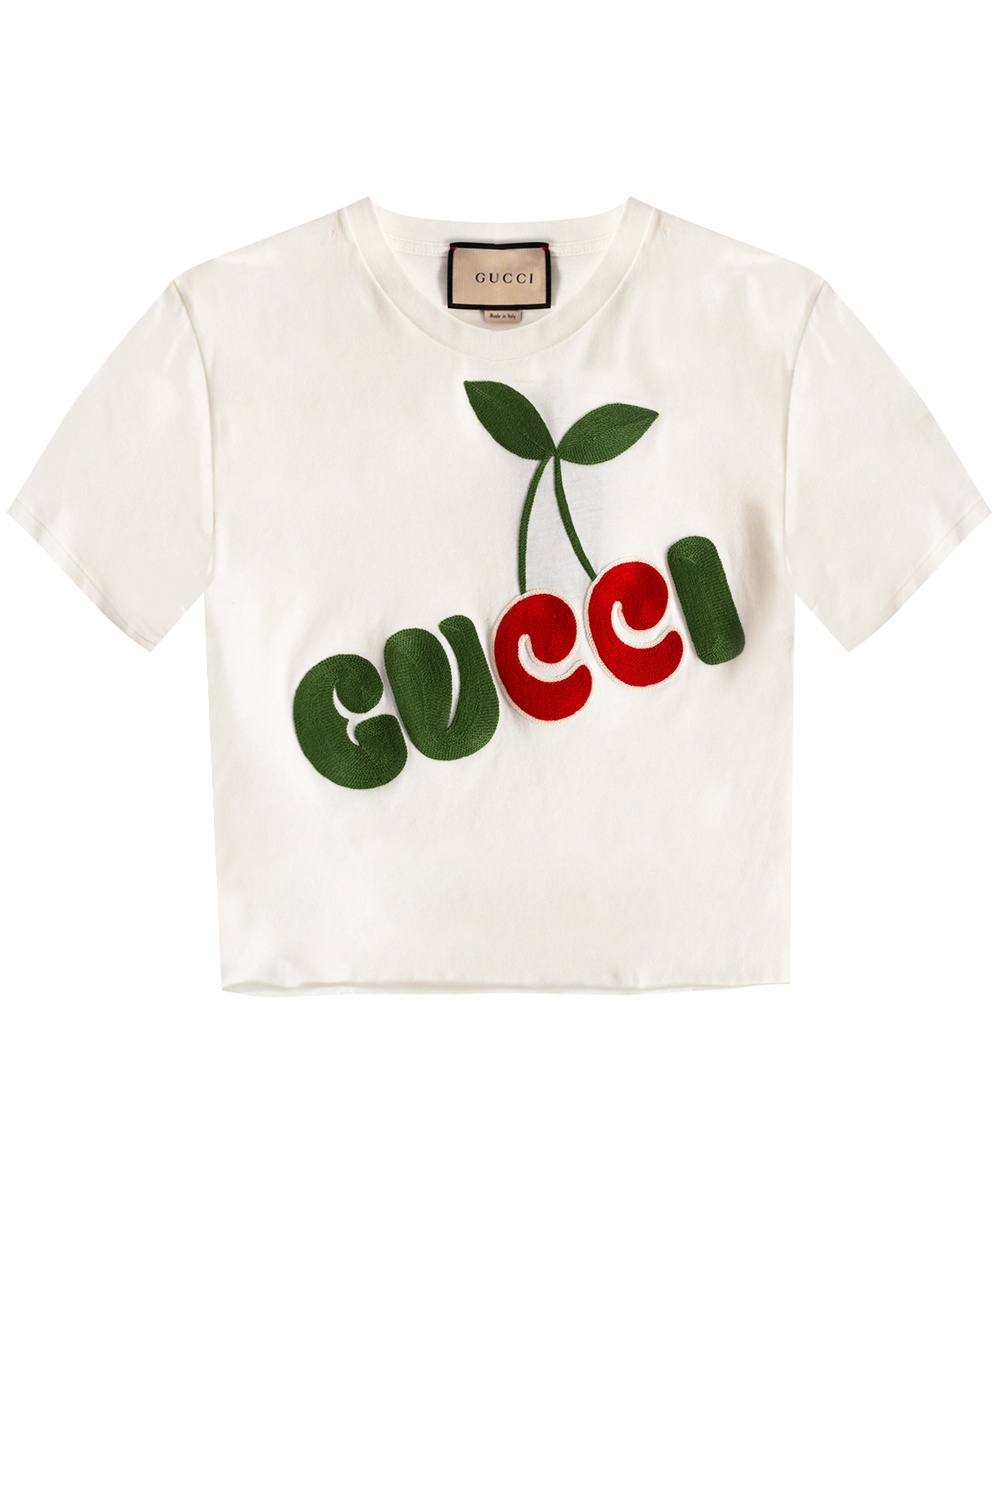 how much does it cost to make a gucci shirt